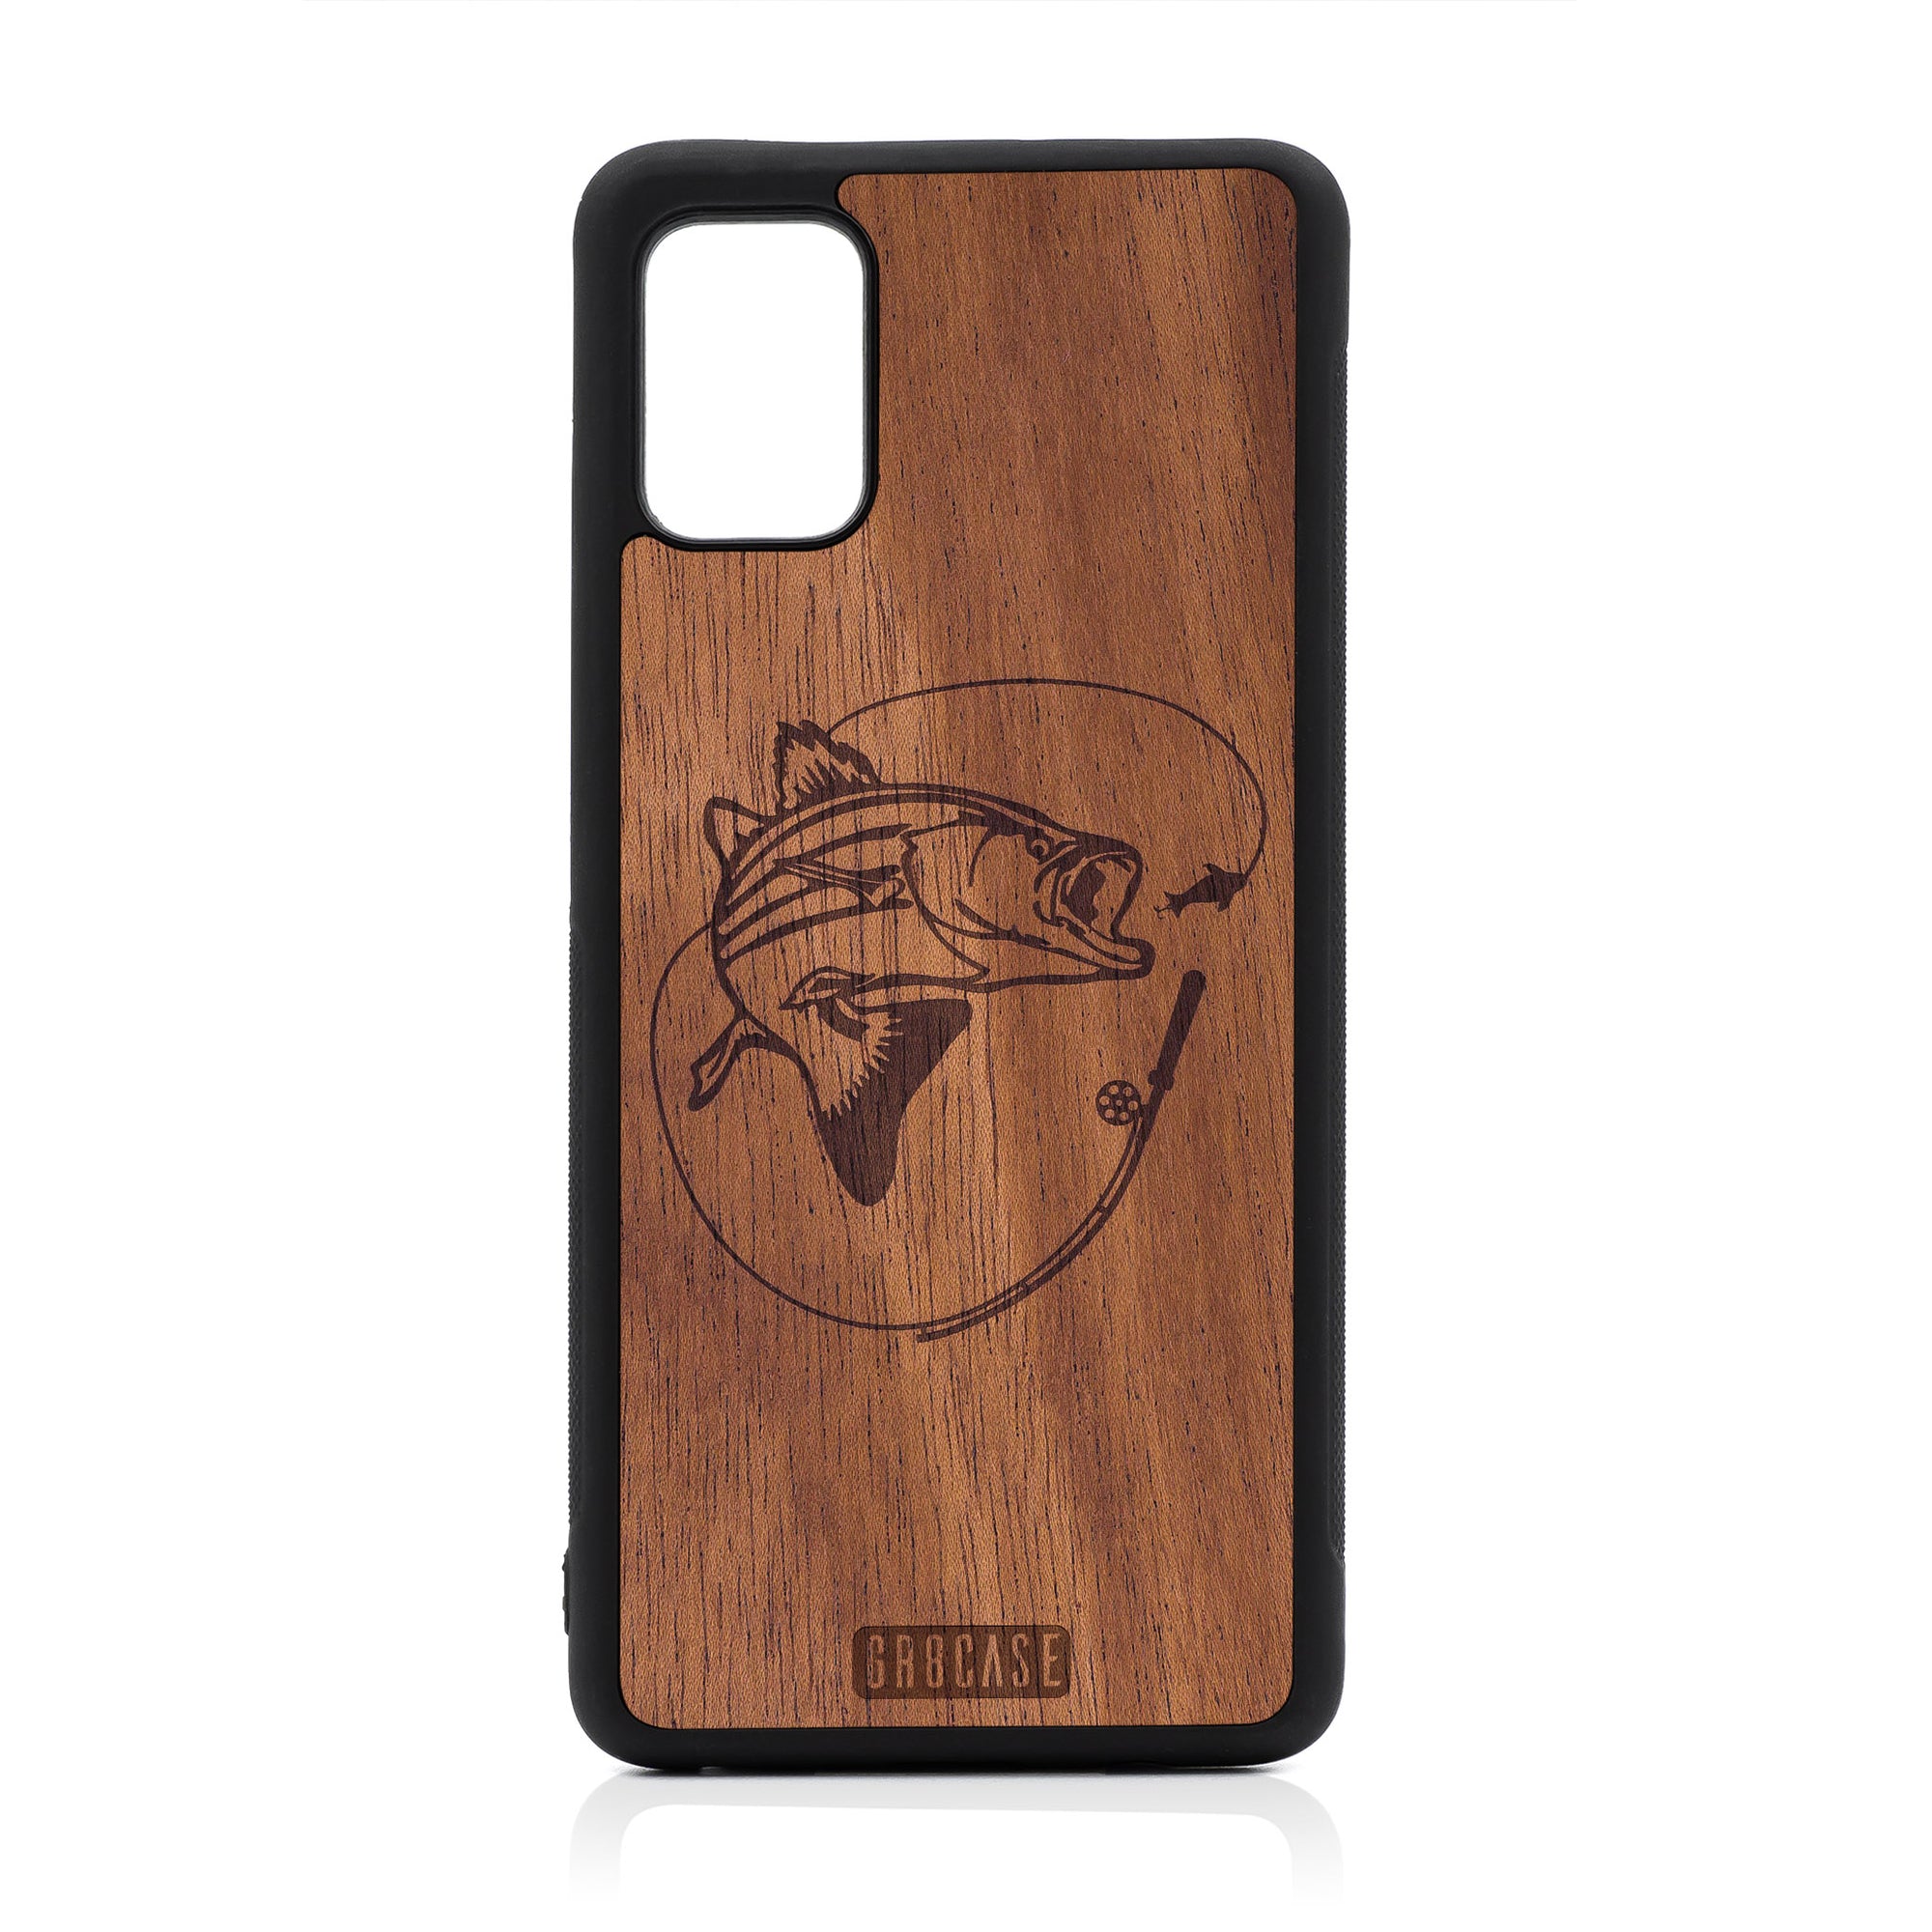 Fish and Reel Design Wood Case For Samsung Galaxy A51-5G